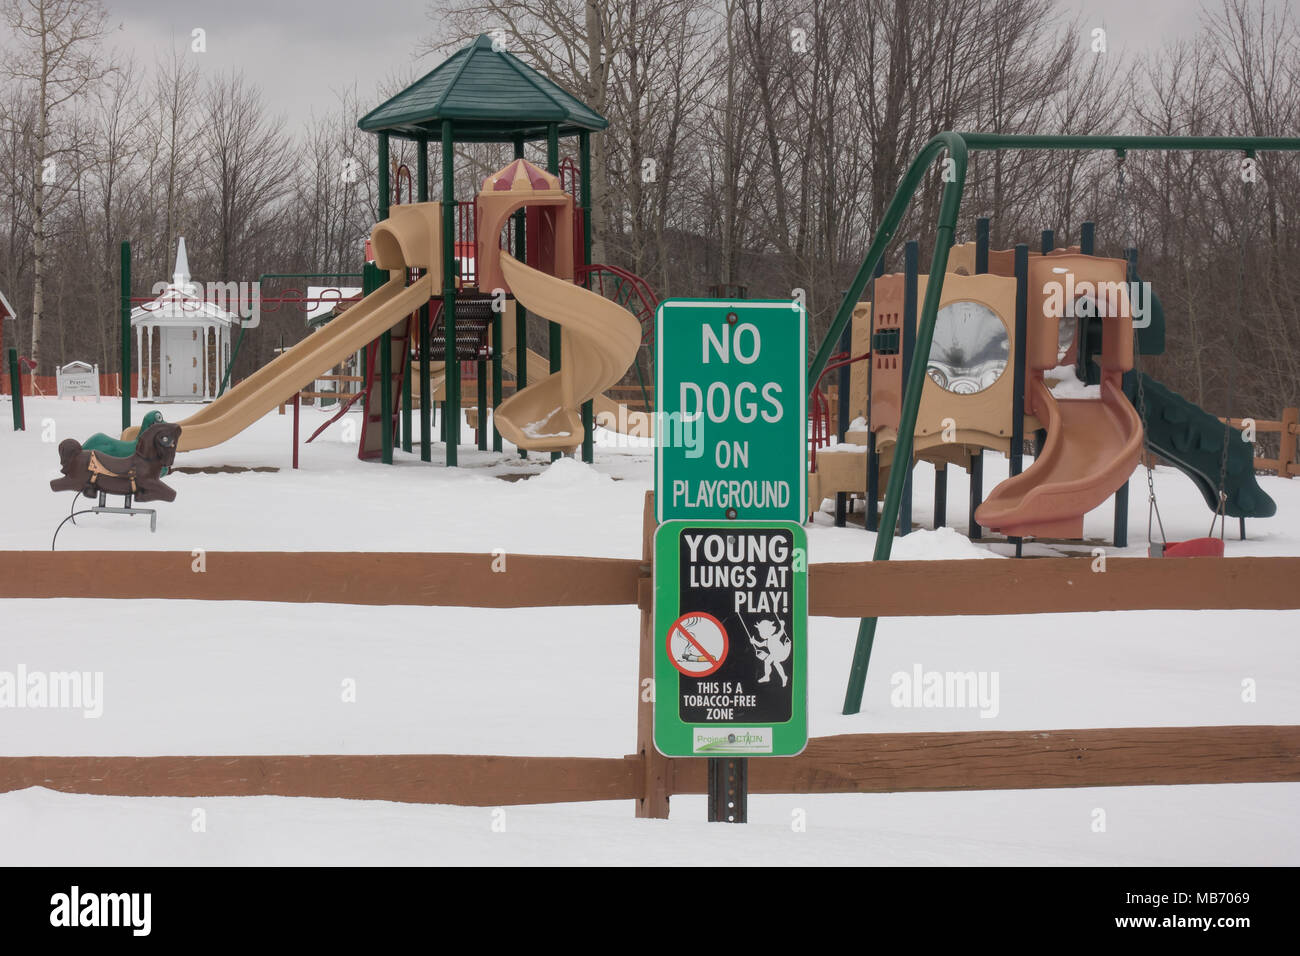 Snow covered playground in Speculator, NY USA with signs indicating no dogs and no smoking on the playground. Stock Photo